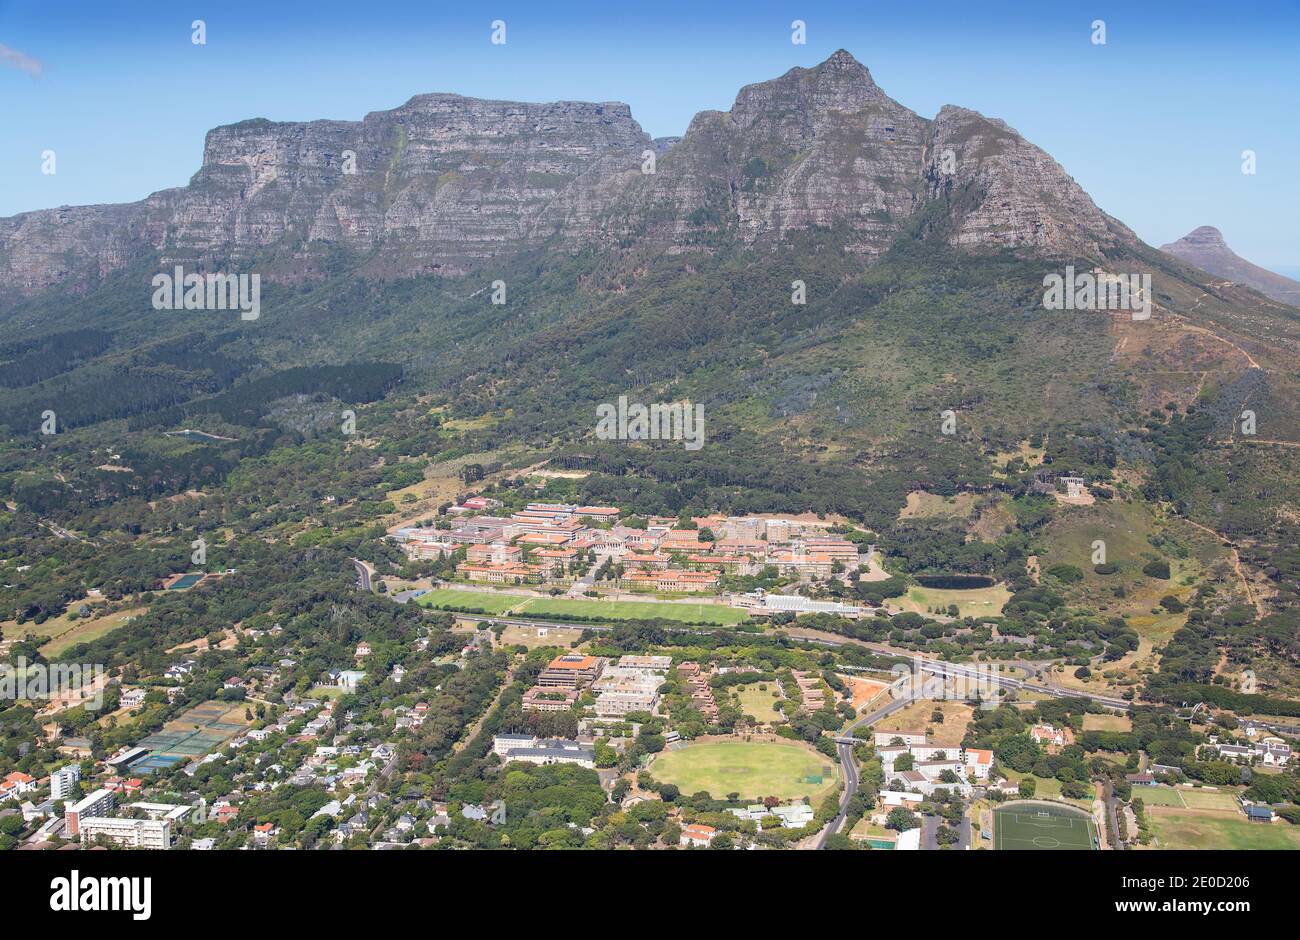 Cape Town, Western Cape, South Africa - 12.22.2020: Air-to-air photo of University of Cape Town with Table Mountain, Rhodes Memorial and Lions Head in Stock Photo